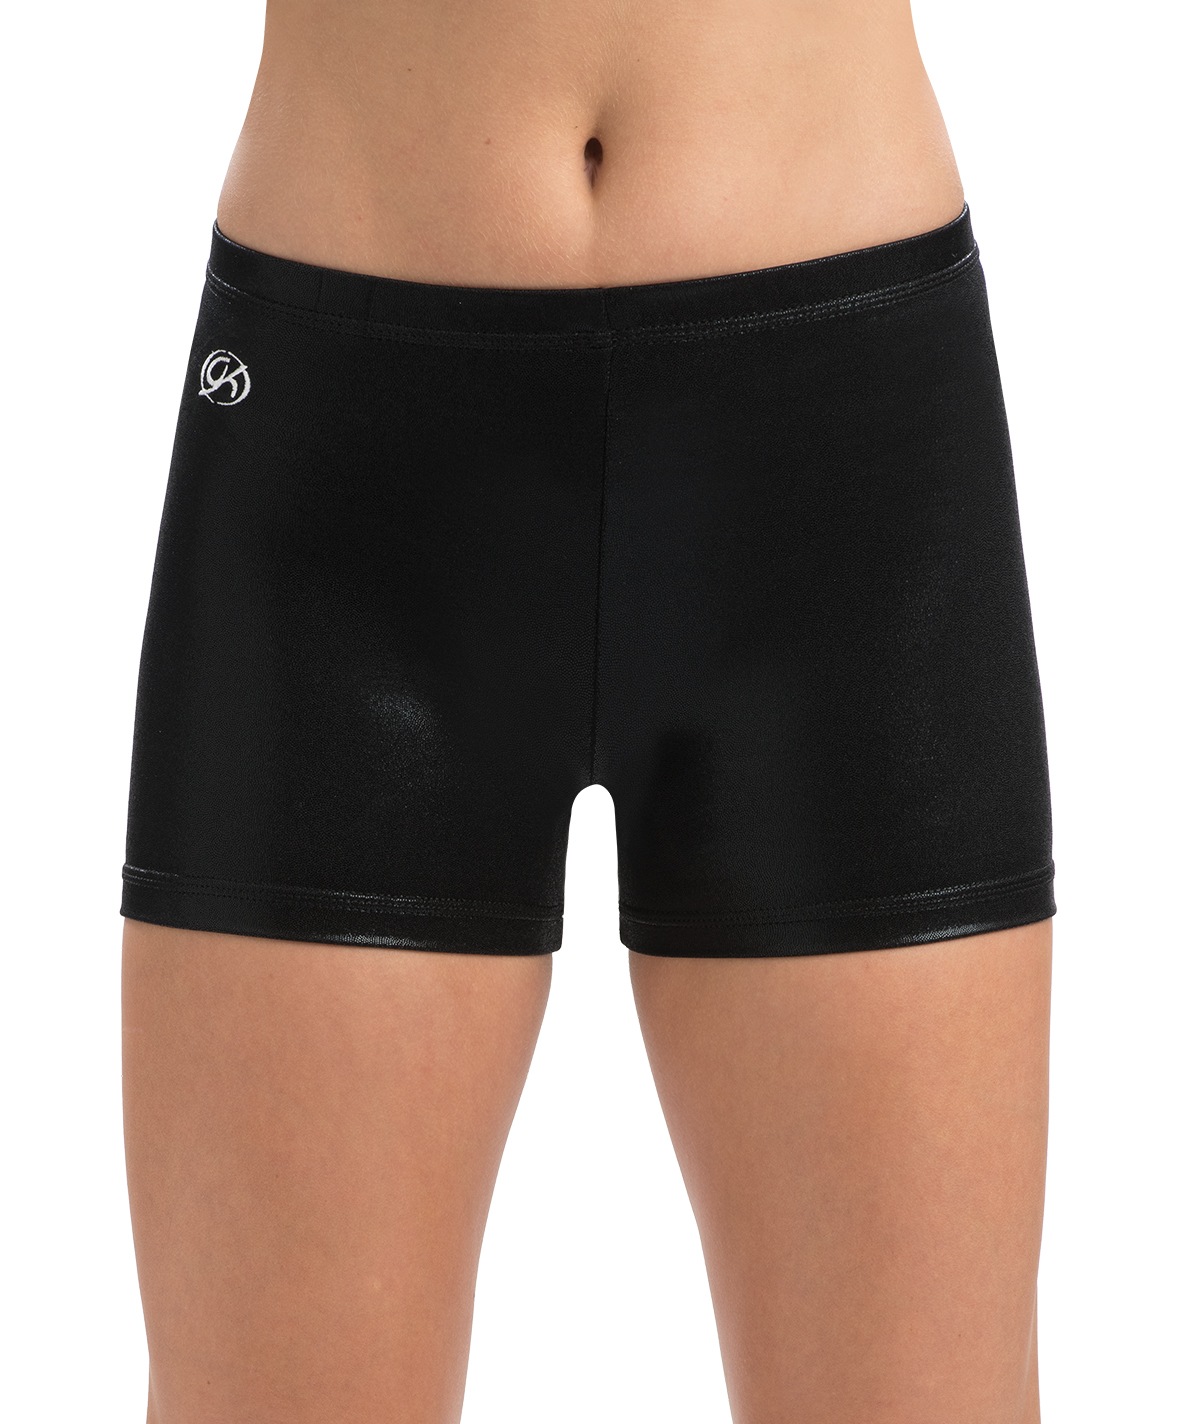 GK All Star Low Rise Mystique Workout Shorts